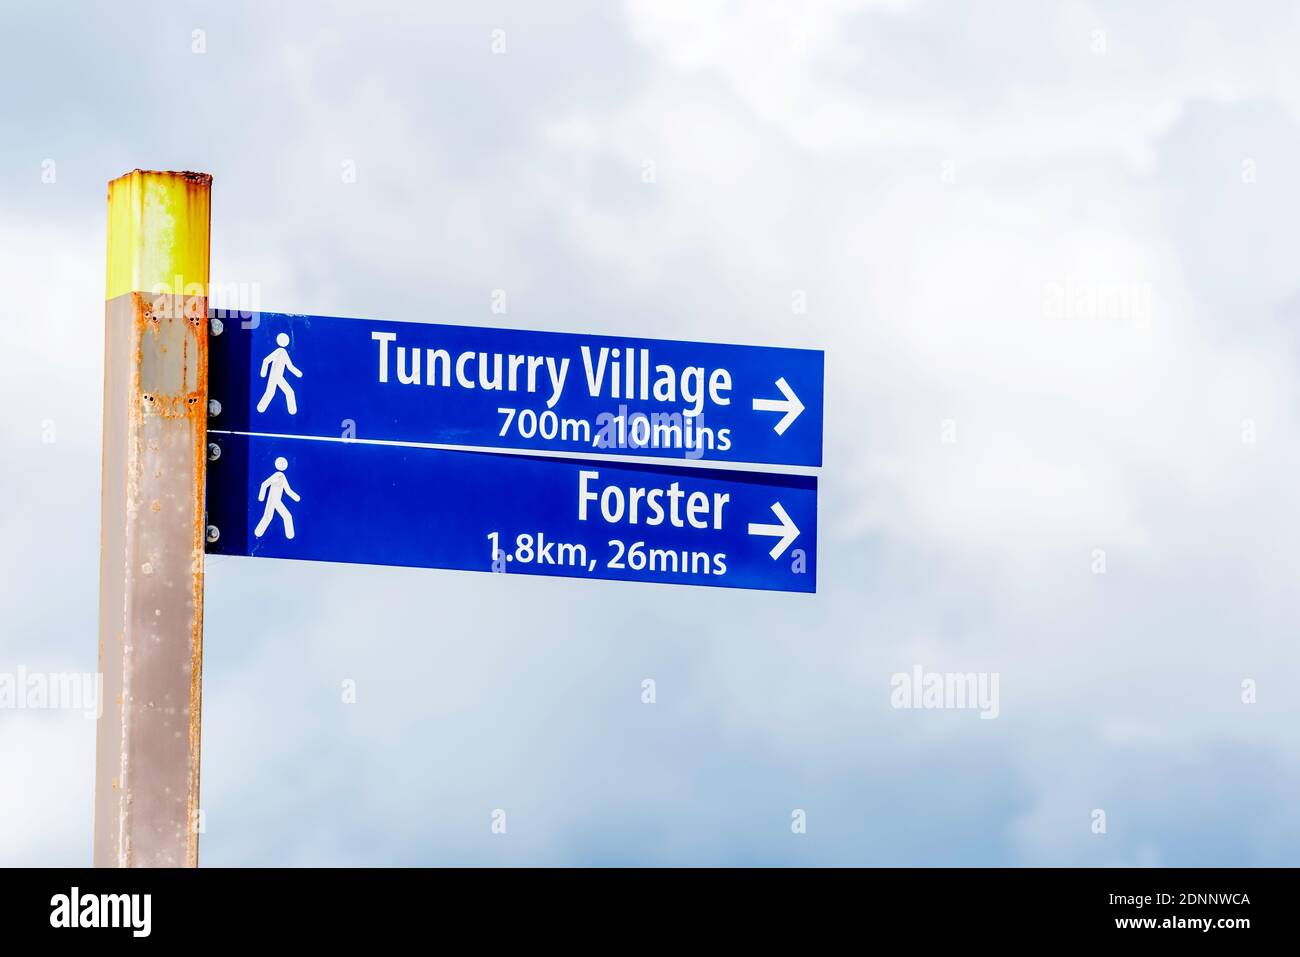 A street sign and sign post providing distance and walking time to locations in Forster Tuncurry, New South Wales, Australia Stock Photo